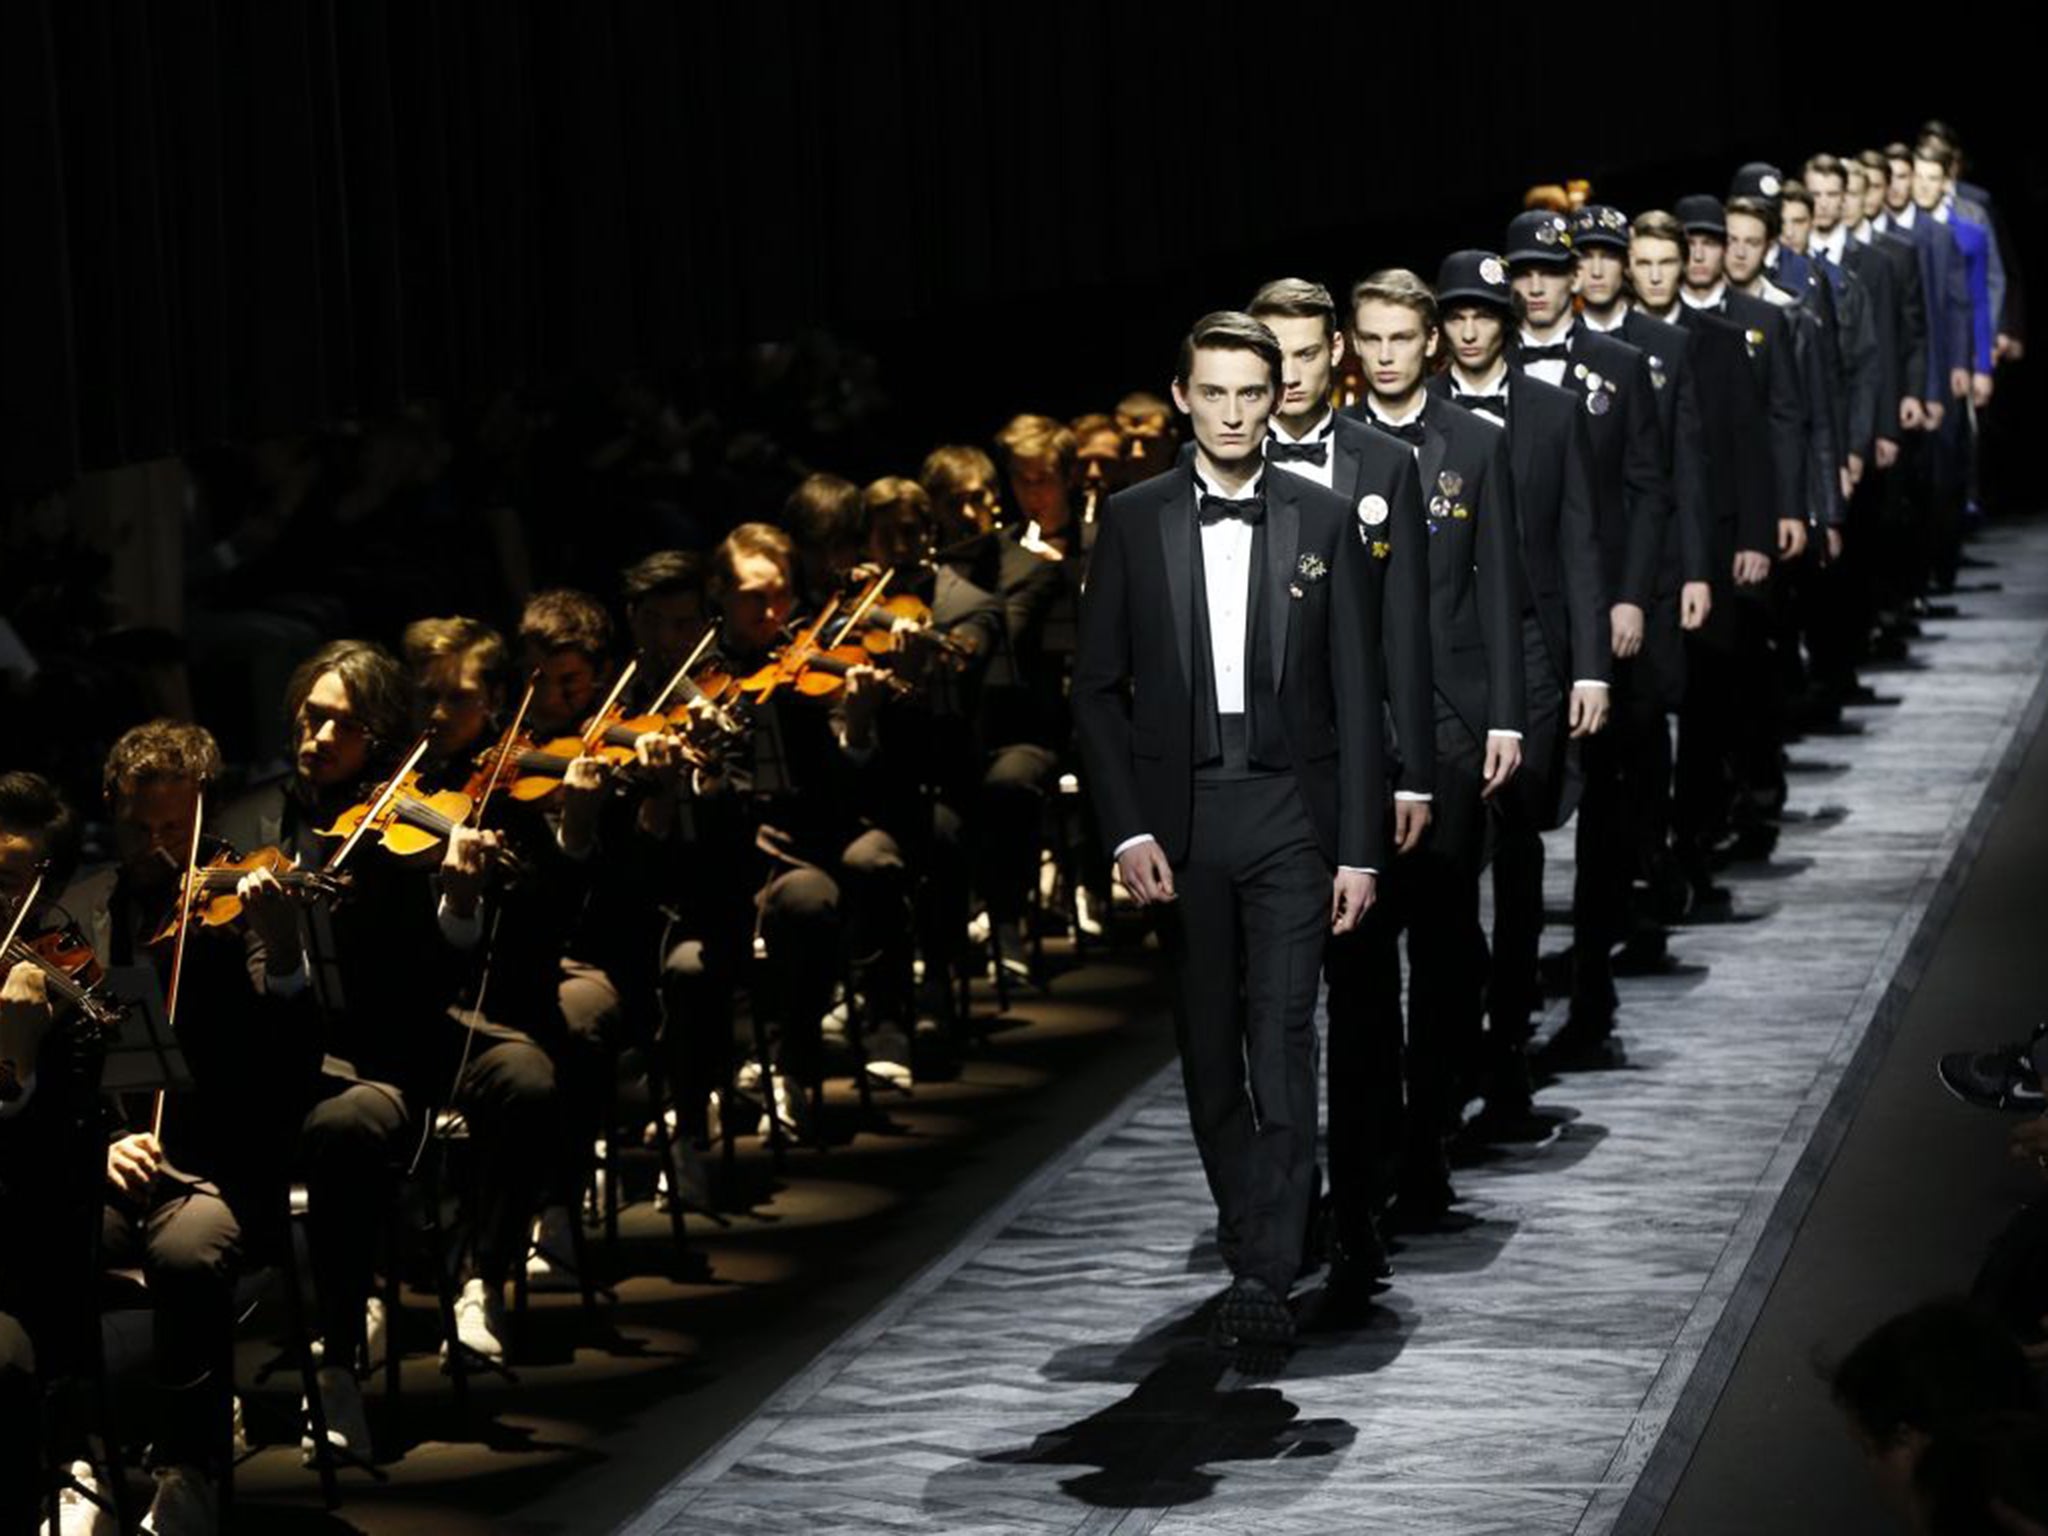 Models – and musicians – on the catwalk in Dior Homme for the men’s 2015/16 fashion show in Paris (AFP)